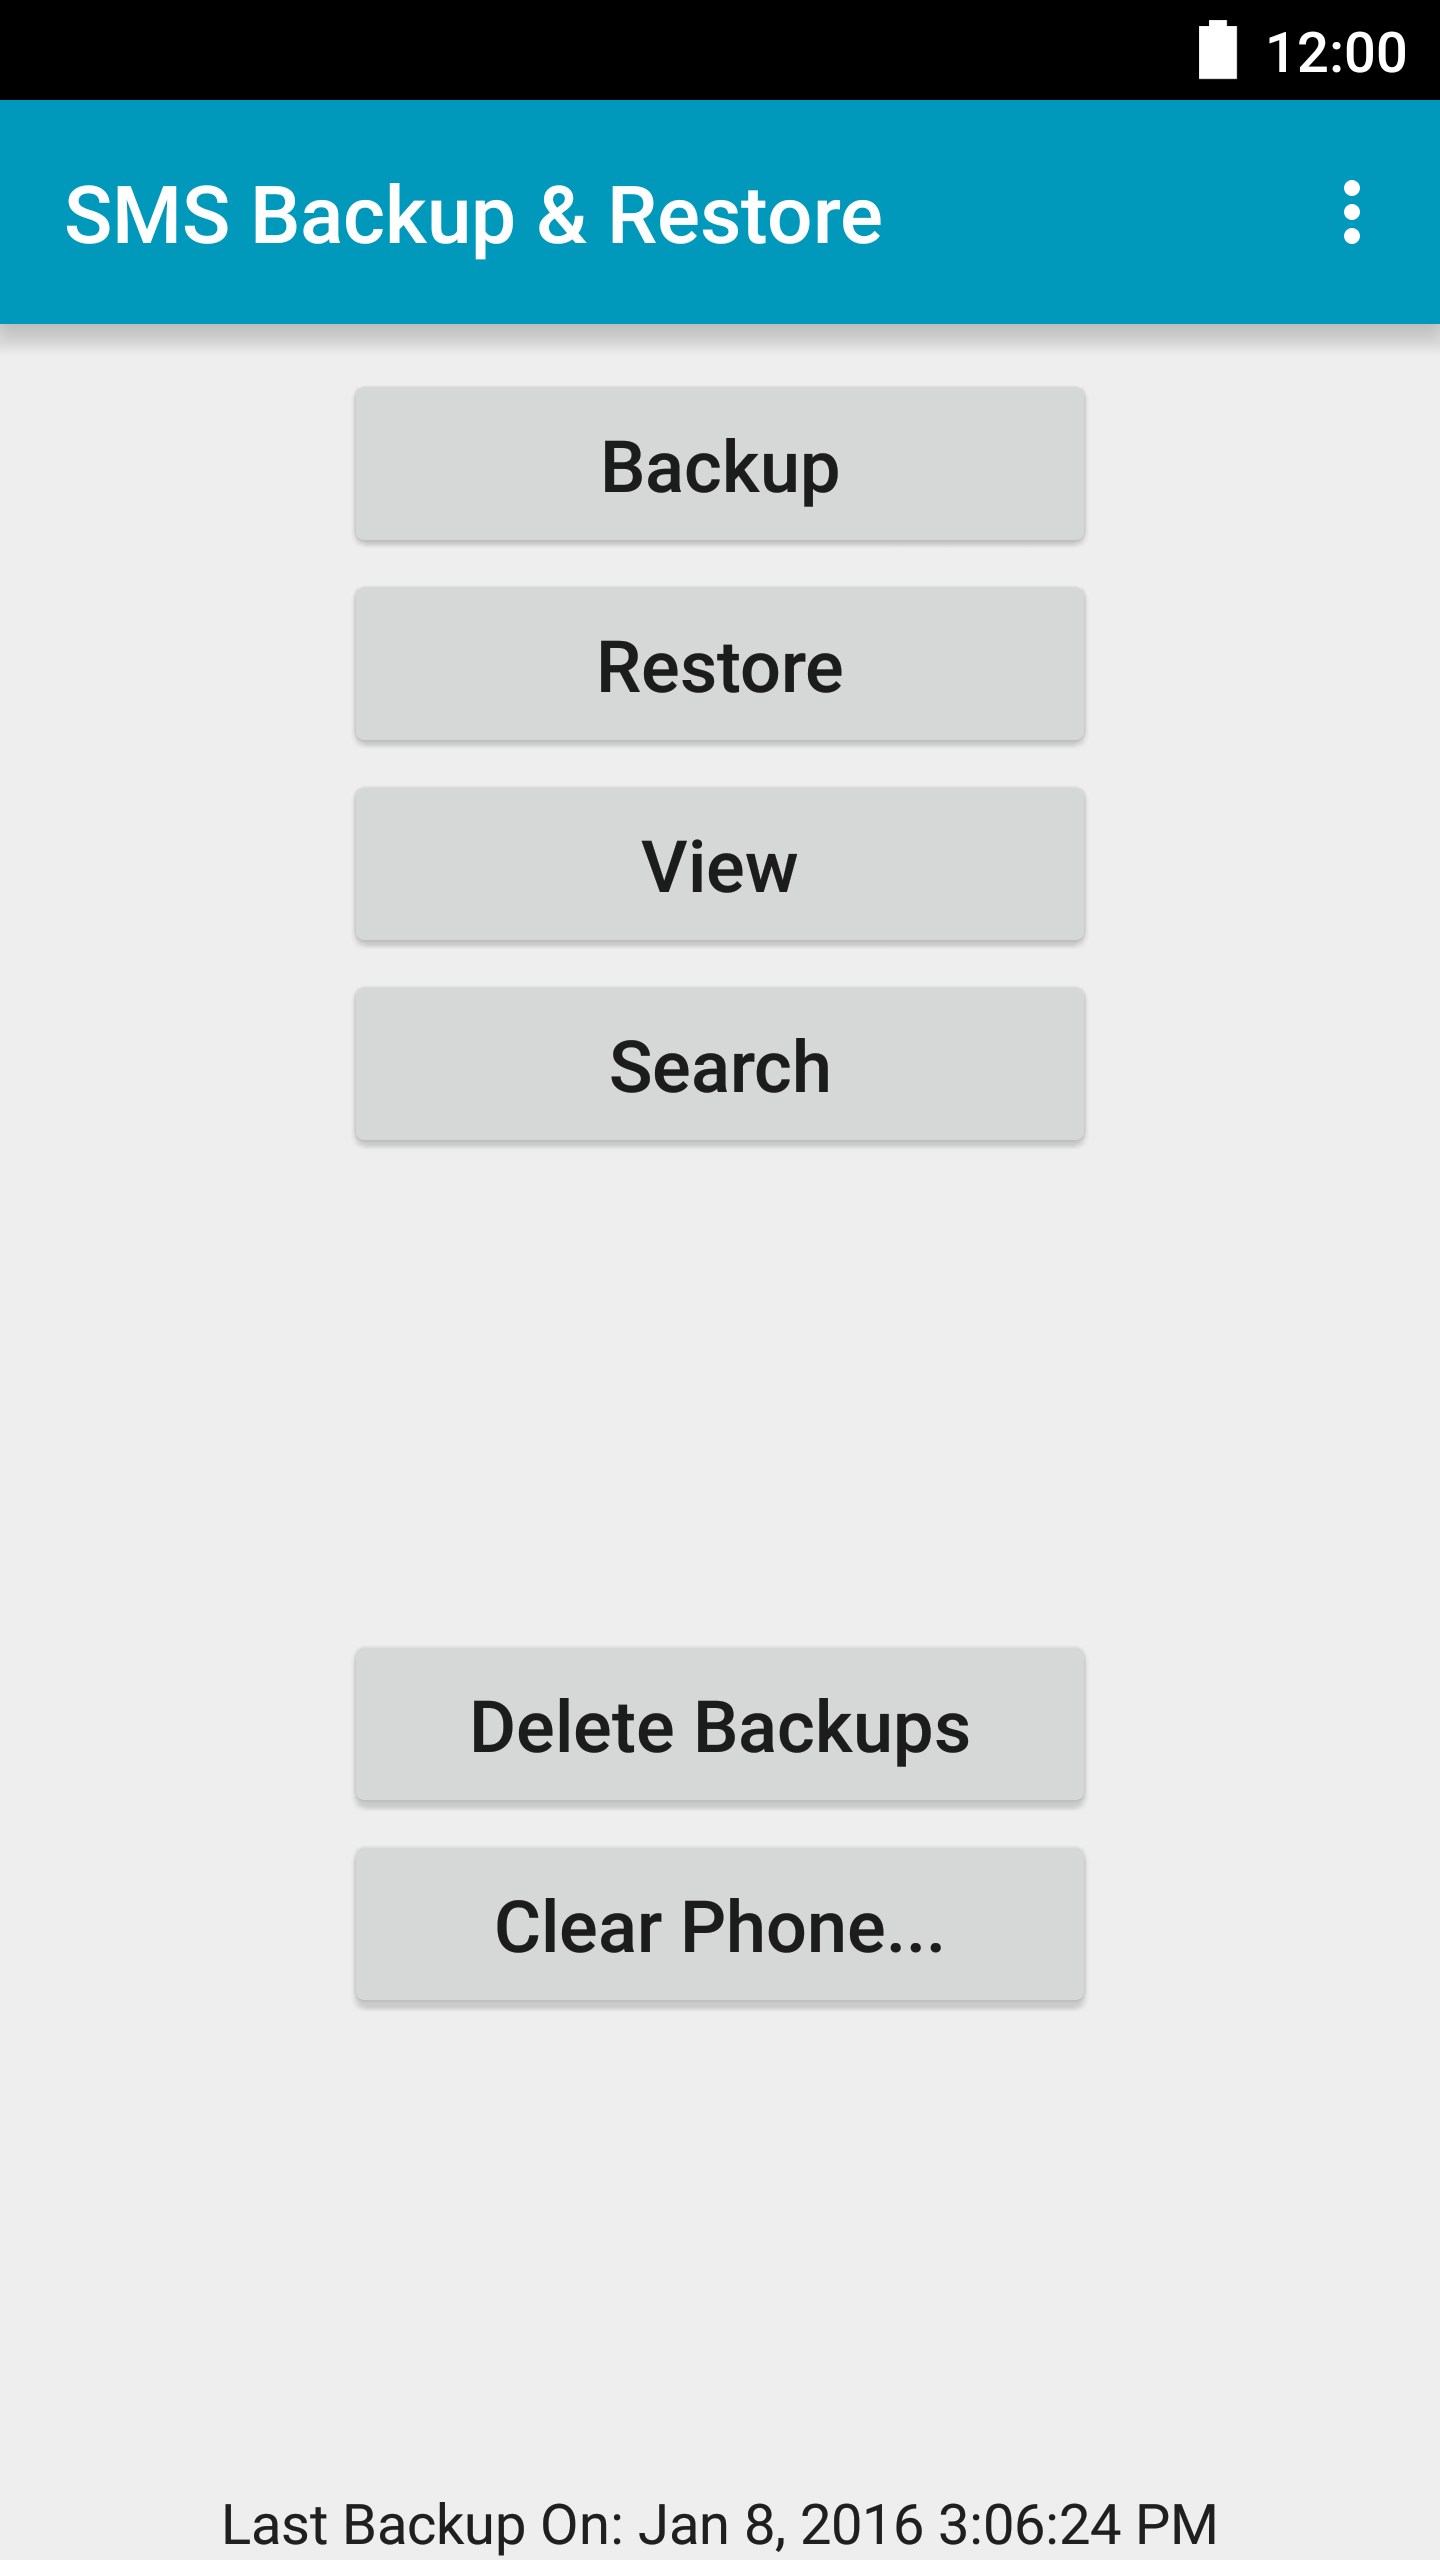 Android application SMS Backup &amp; Restore screenshort